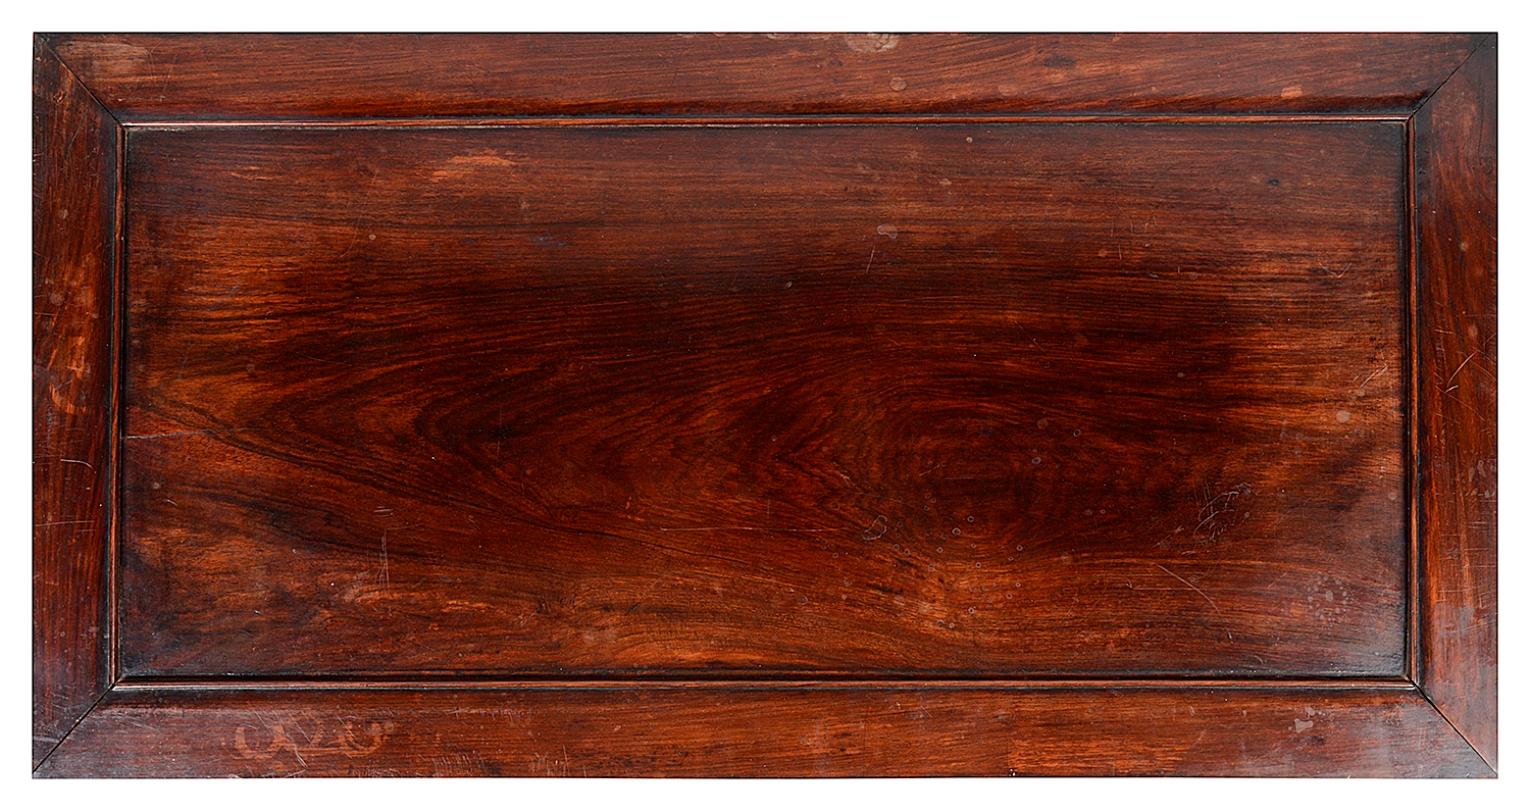 Hand-Carved 19th Century Chinese Hardwood Opium Table For Sale